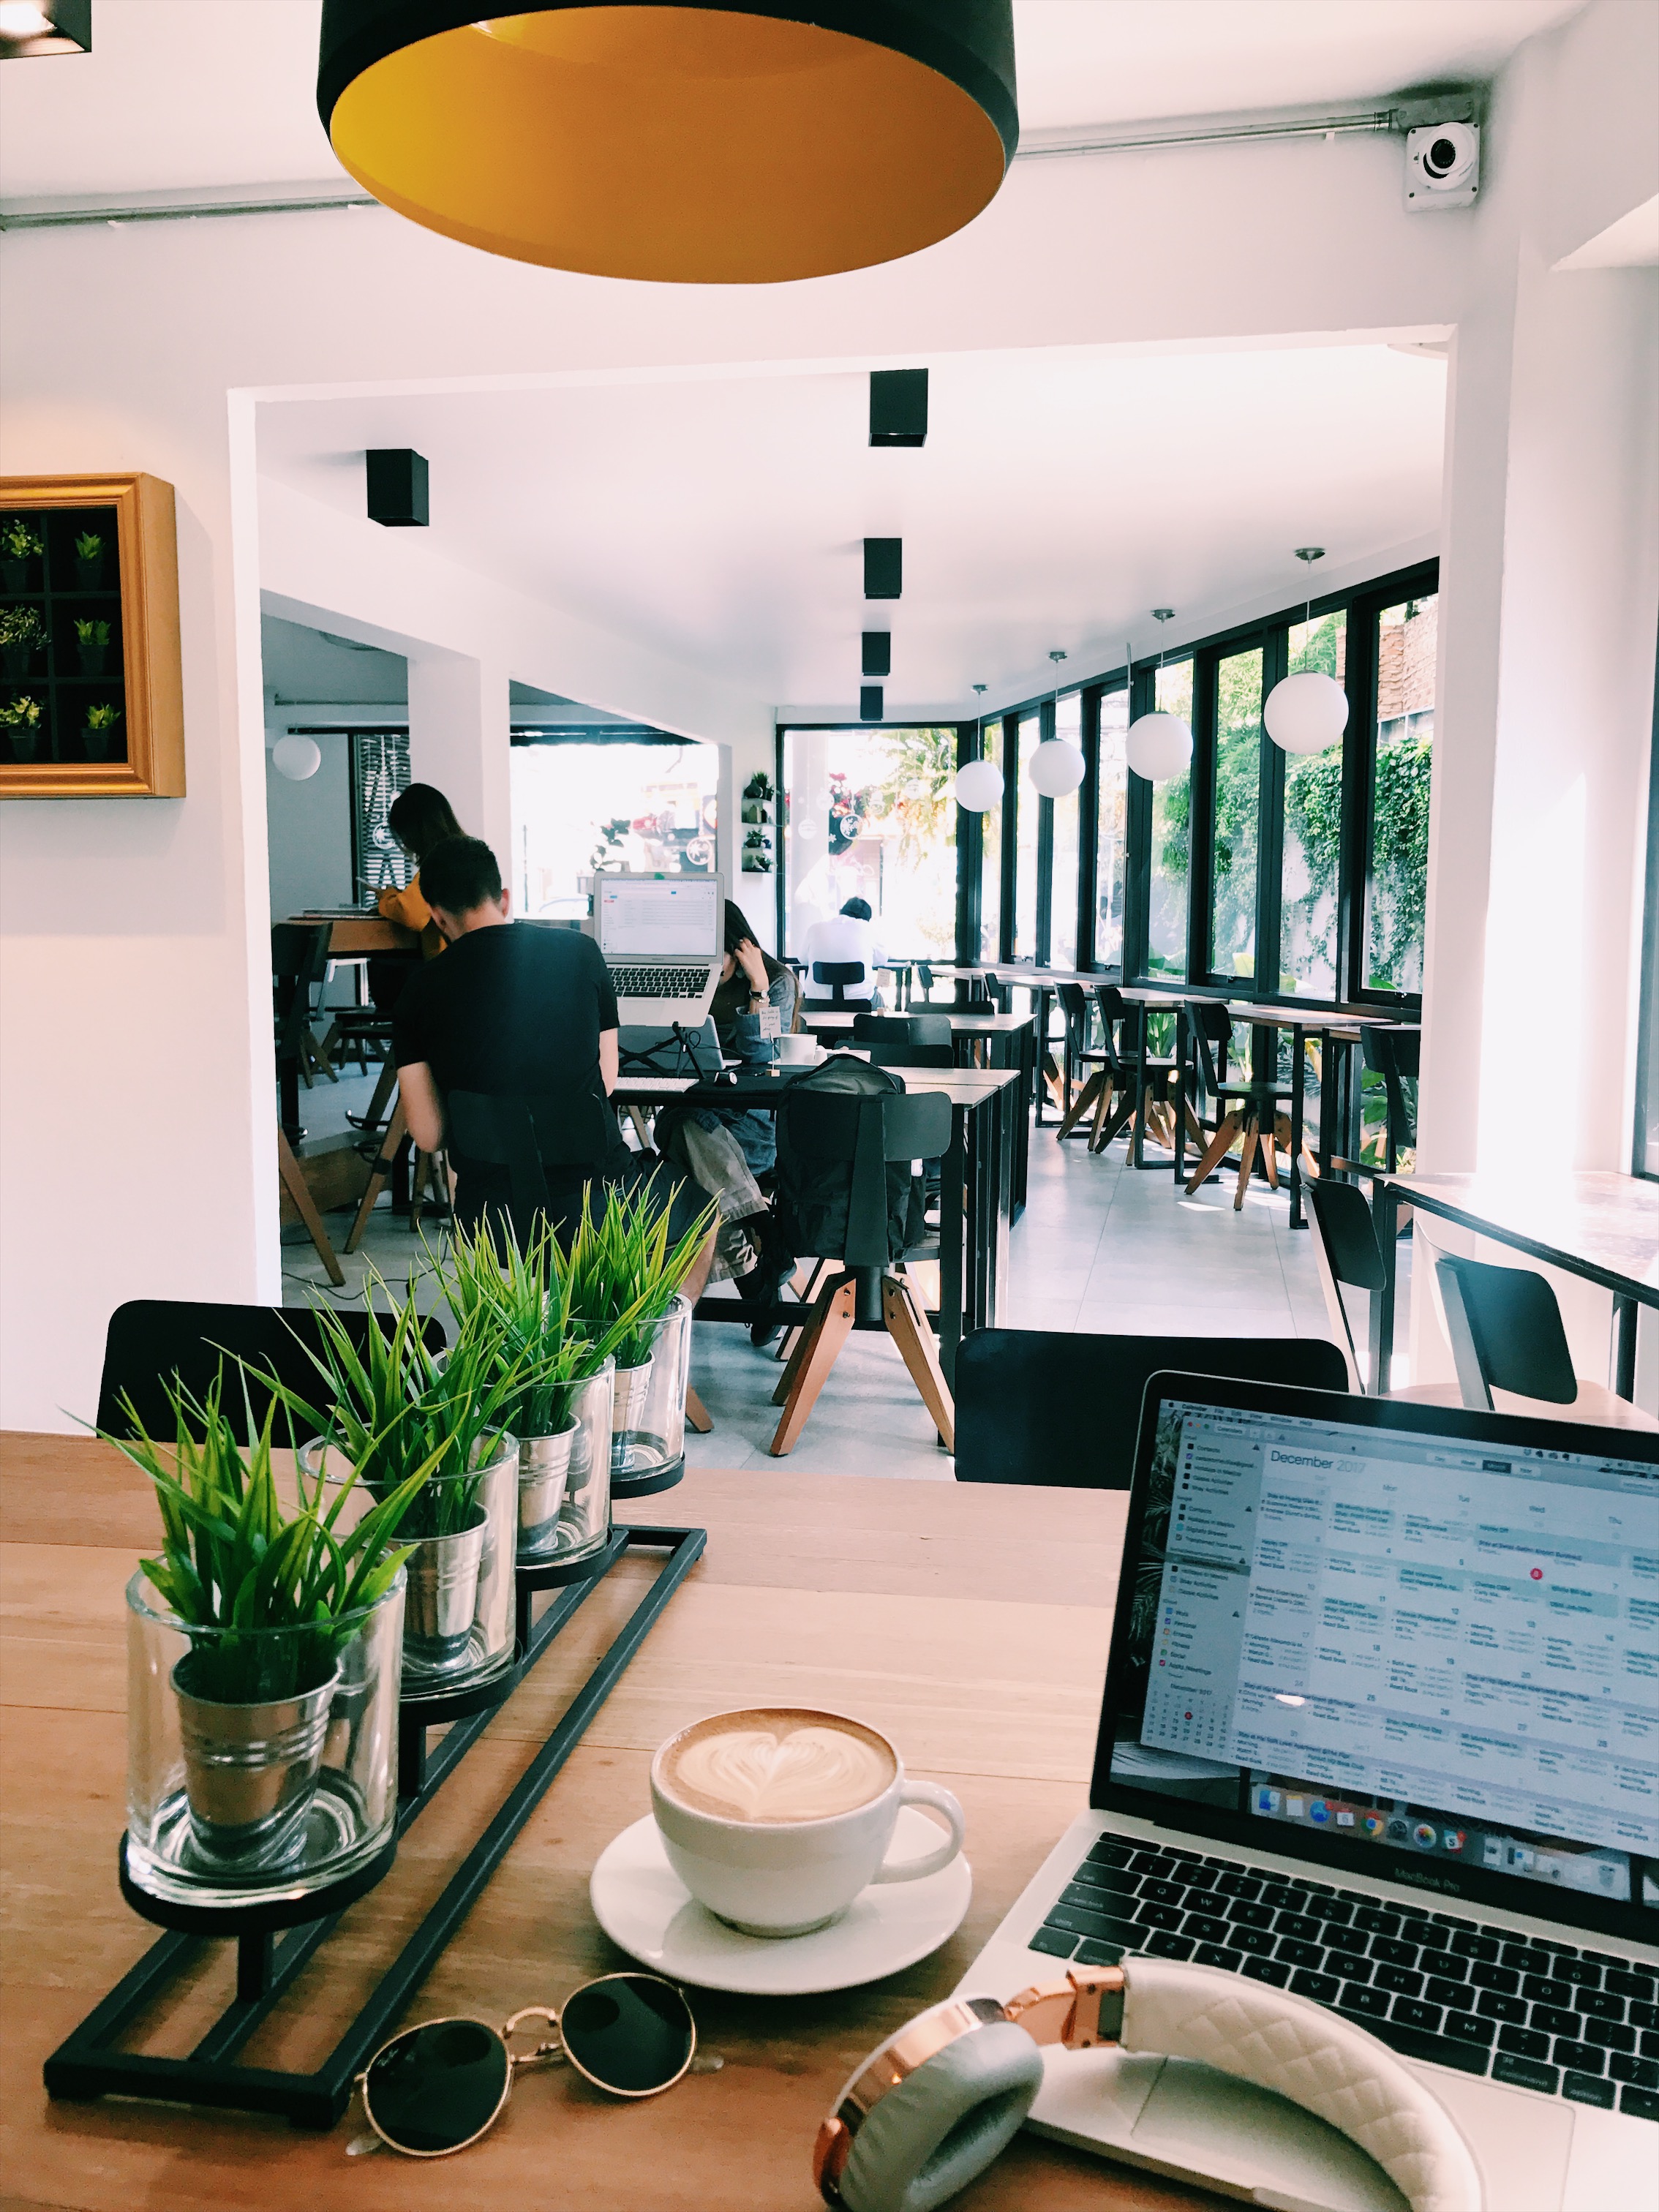 One of our absolute fave things about being a location-independent girl boss in Chiang Mai is the ridiculous amount of ah-mazing, unique coffee shops to work from! Here’s our small but oh-so mighty list of our fave coffee shops to work from in Chiang Mai: